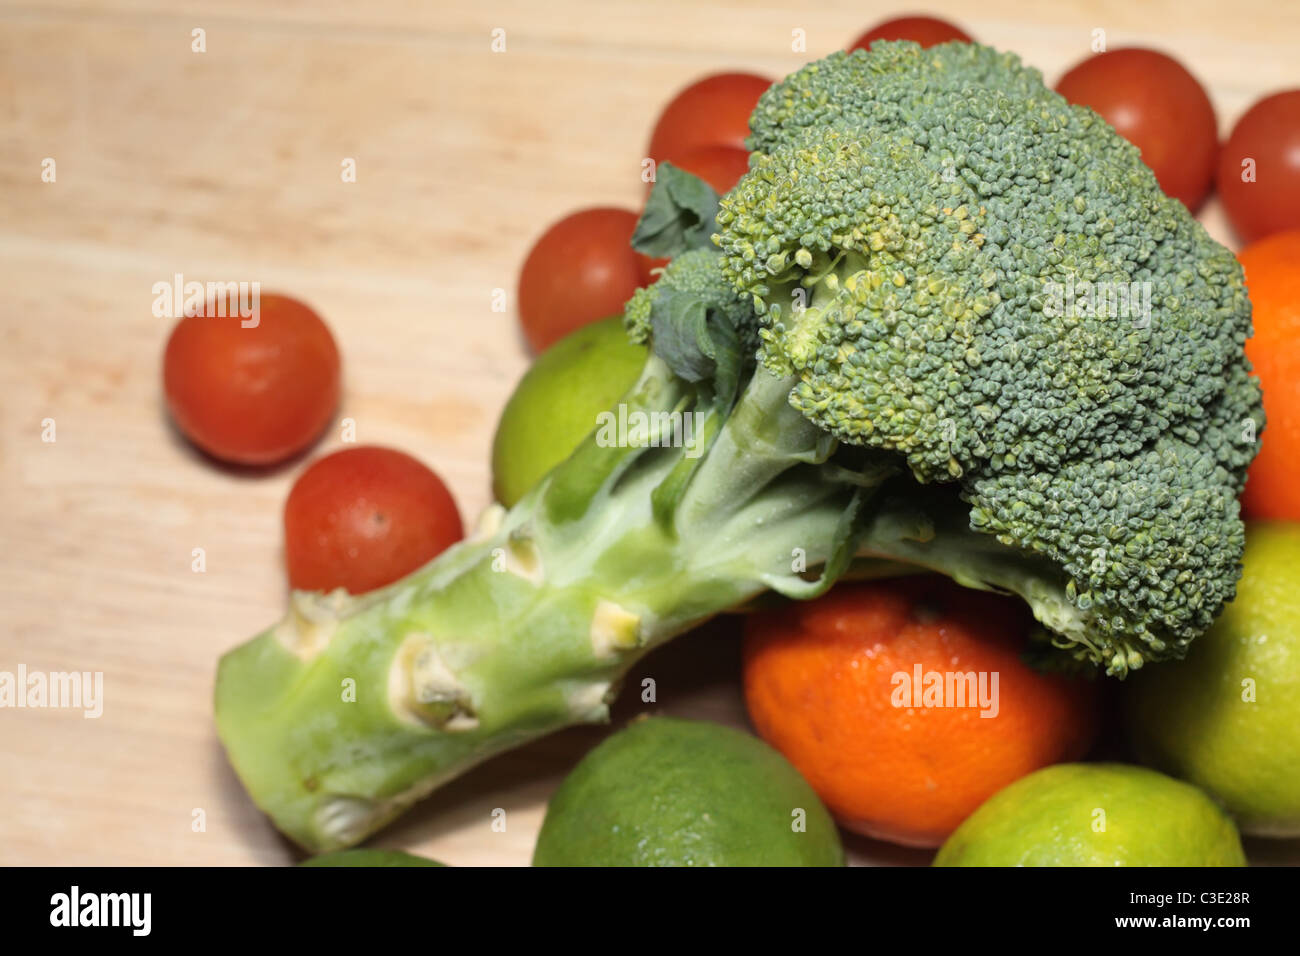 Broccoli is one of the great source of vitamin C and fiber, great for cancer sticken patients Stock Photo